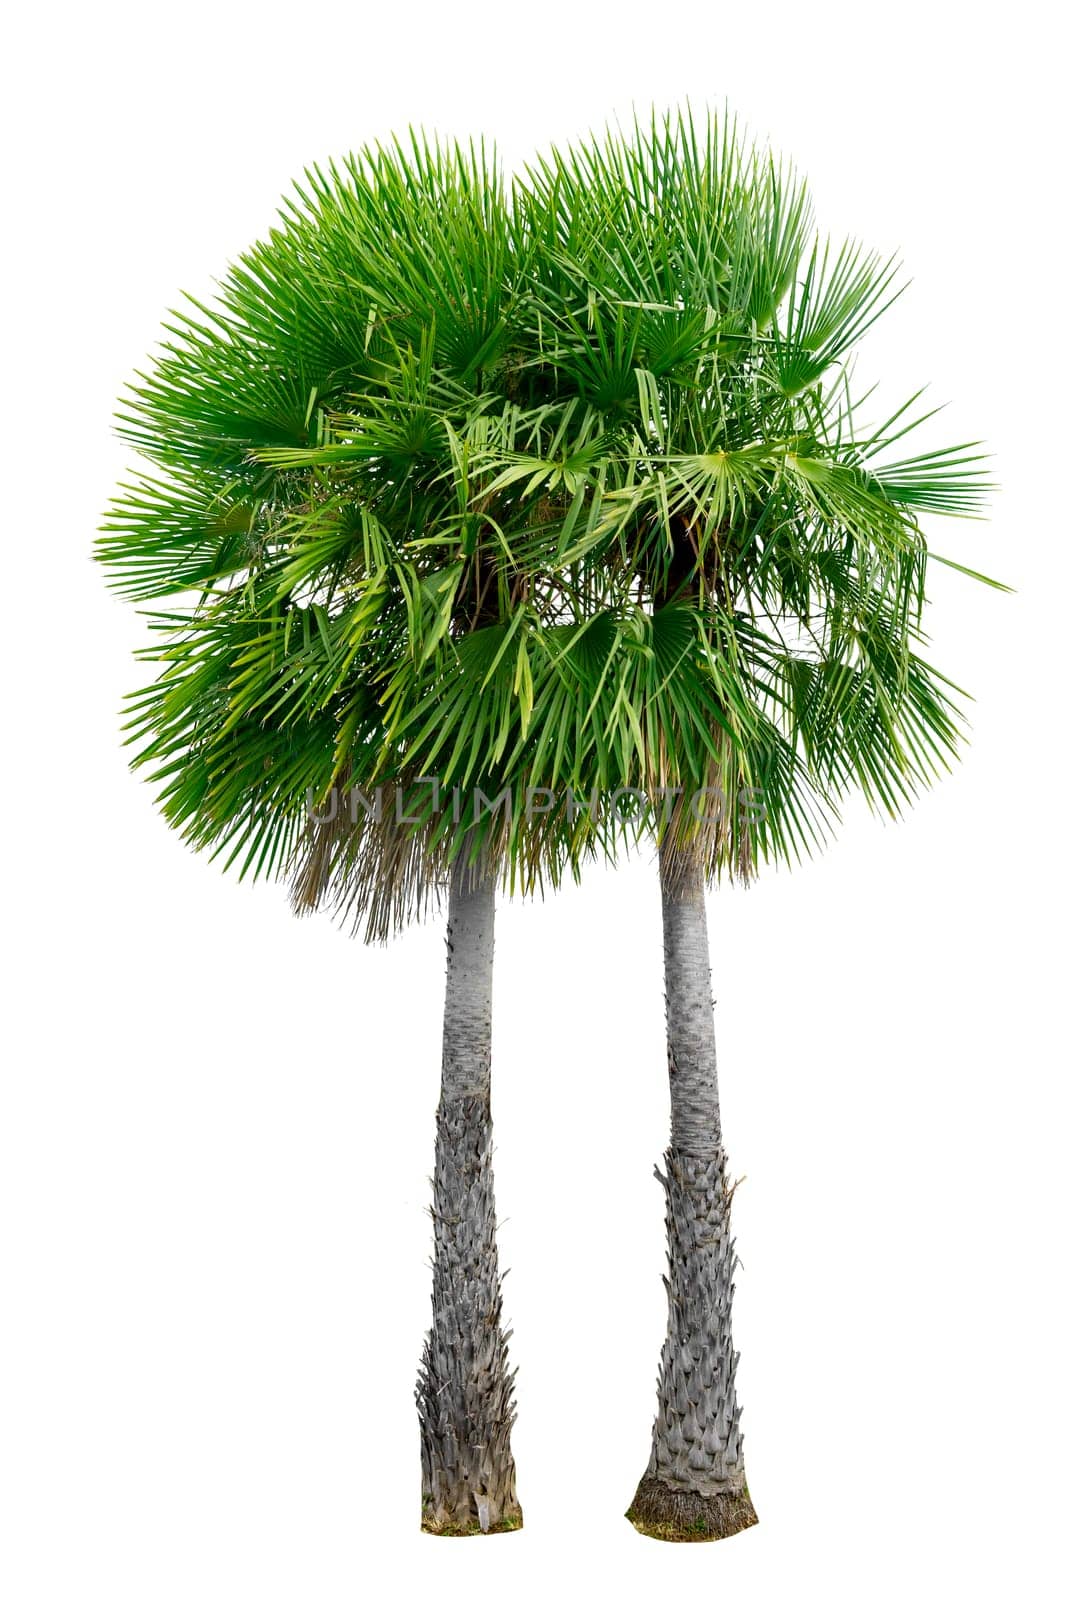 Big palm trees used in garden decoration on white background. Isolated by sarayut_thaneerat